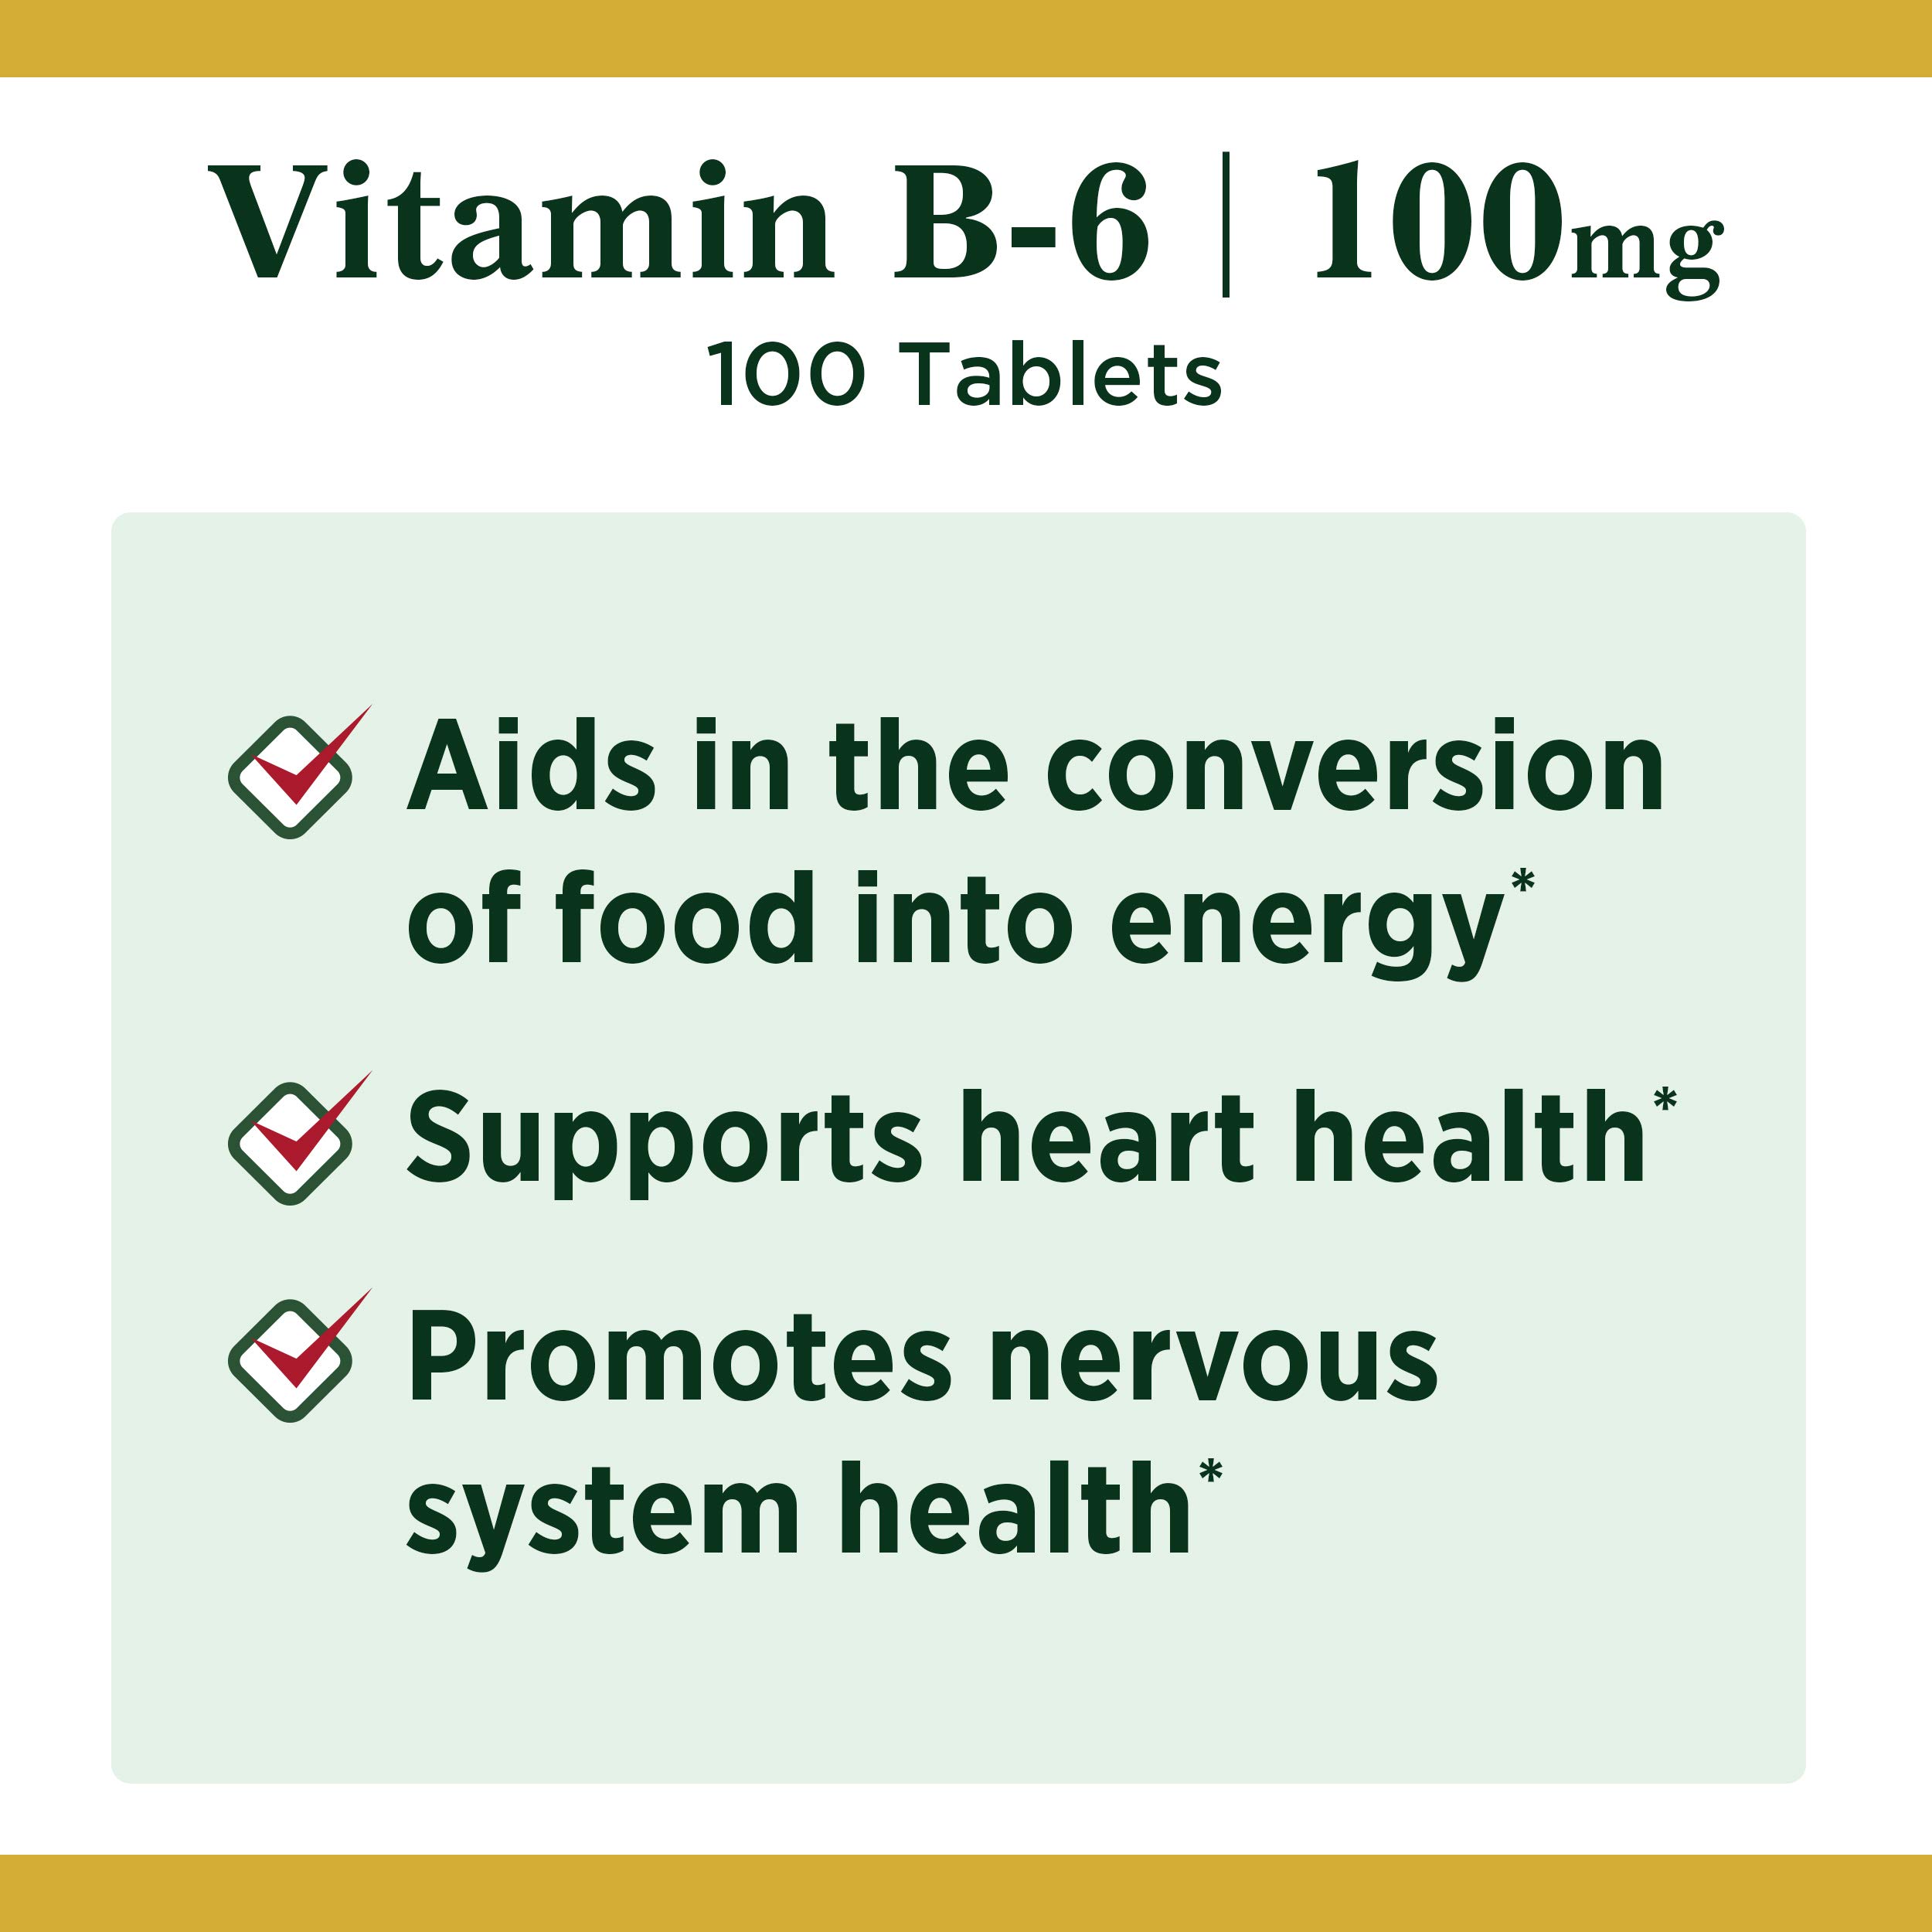 Nature's Bounty Vitamin B6, Supports Energy Metabolism and Nervous System Health, 100mg, Tablets, 100 Ct (Pack of 2)